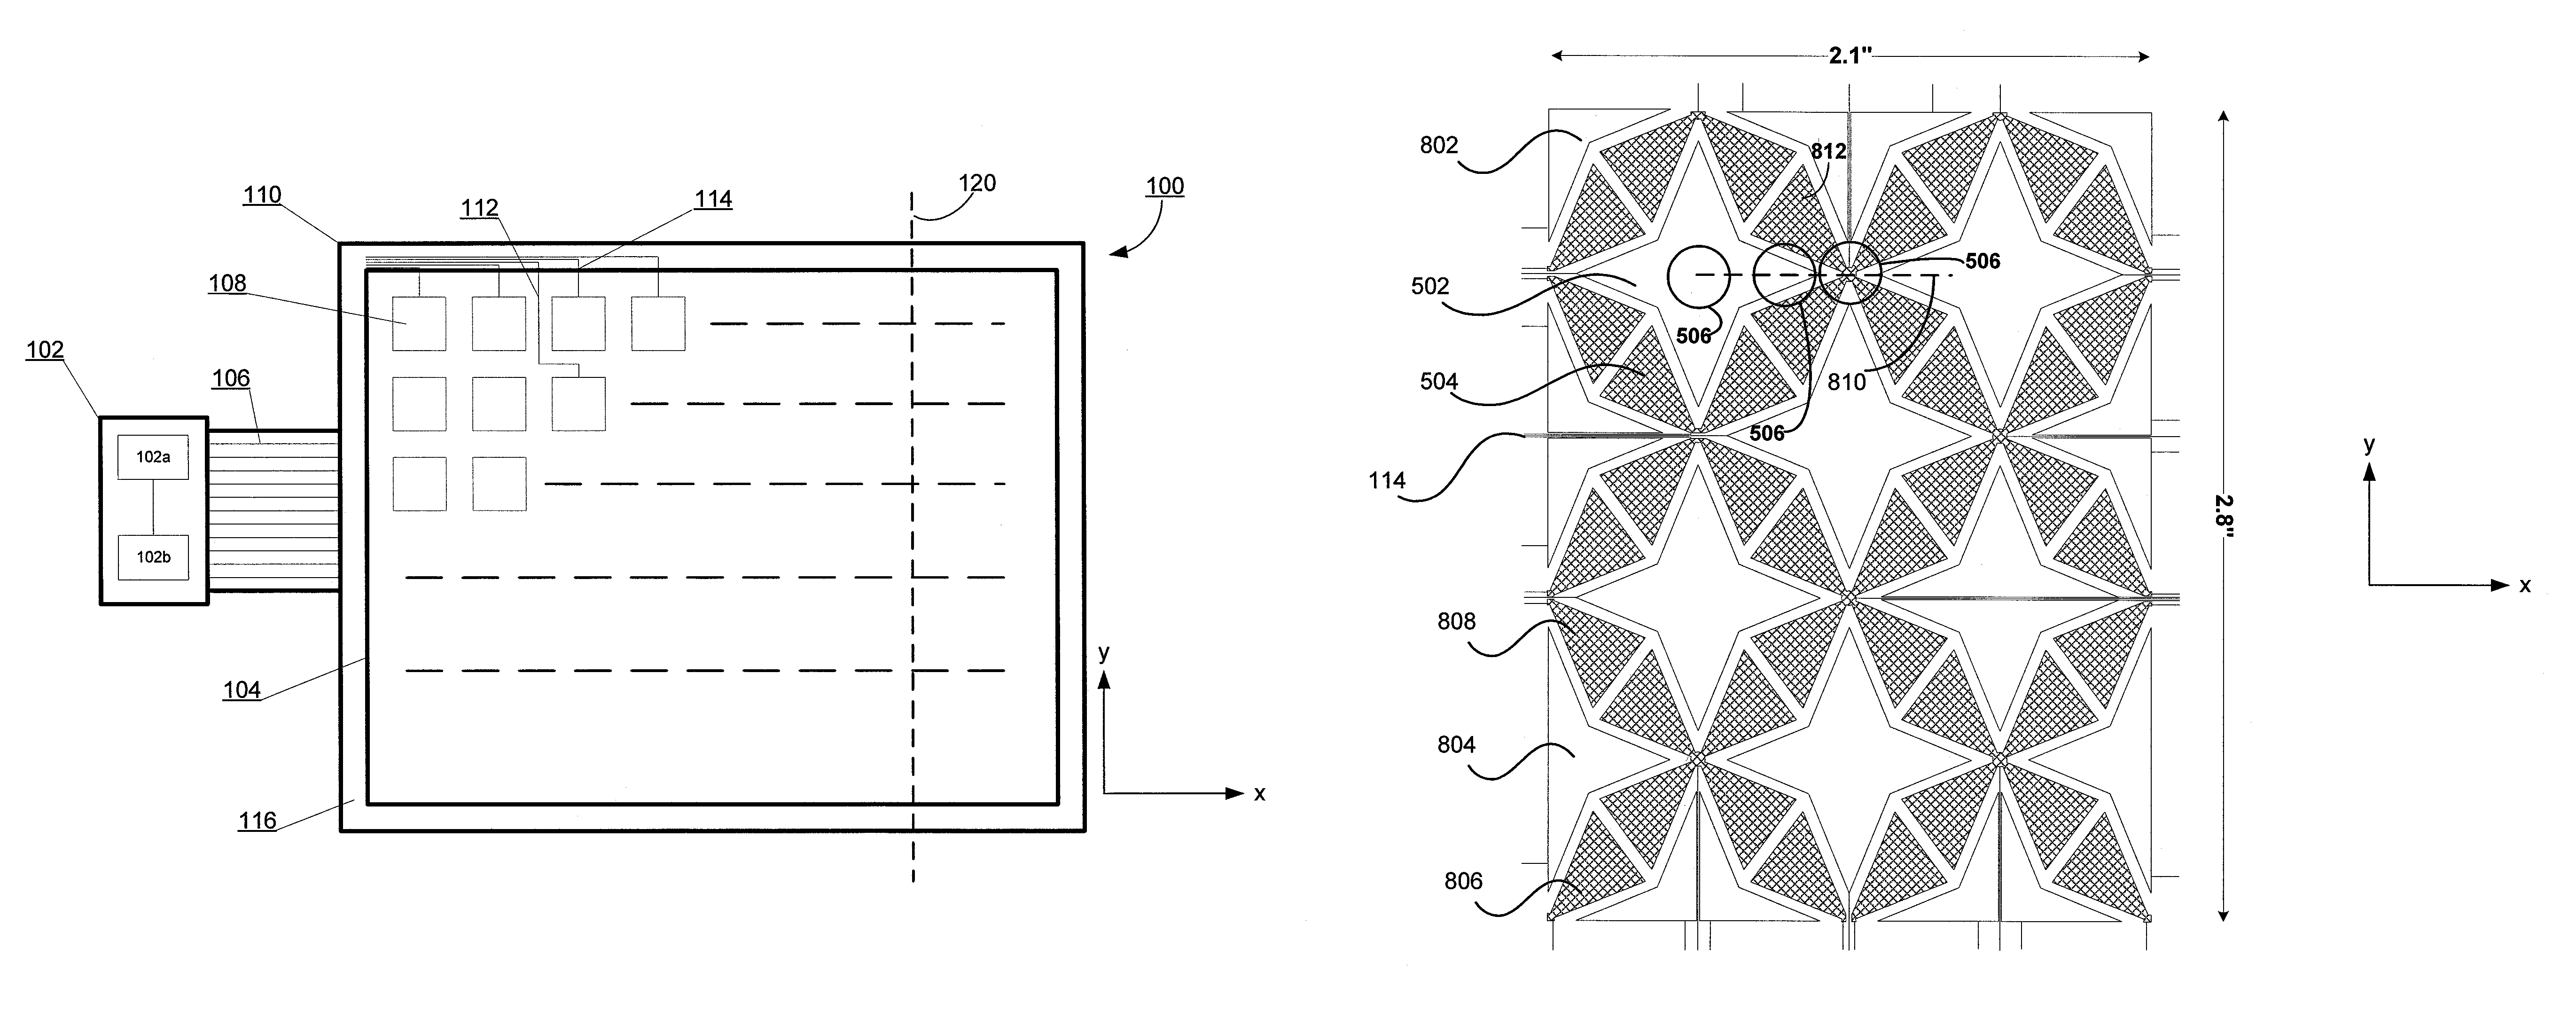 Alternating, complementary conductive element pattern for multi-touch sensor